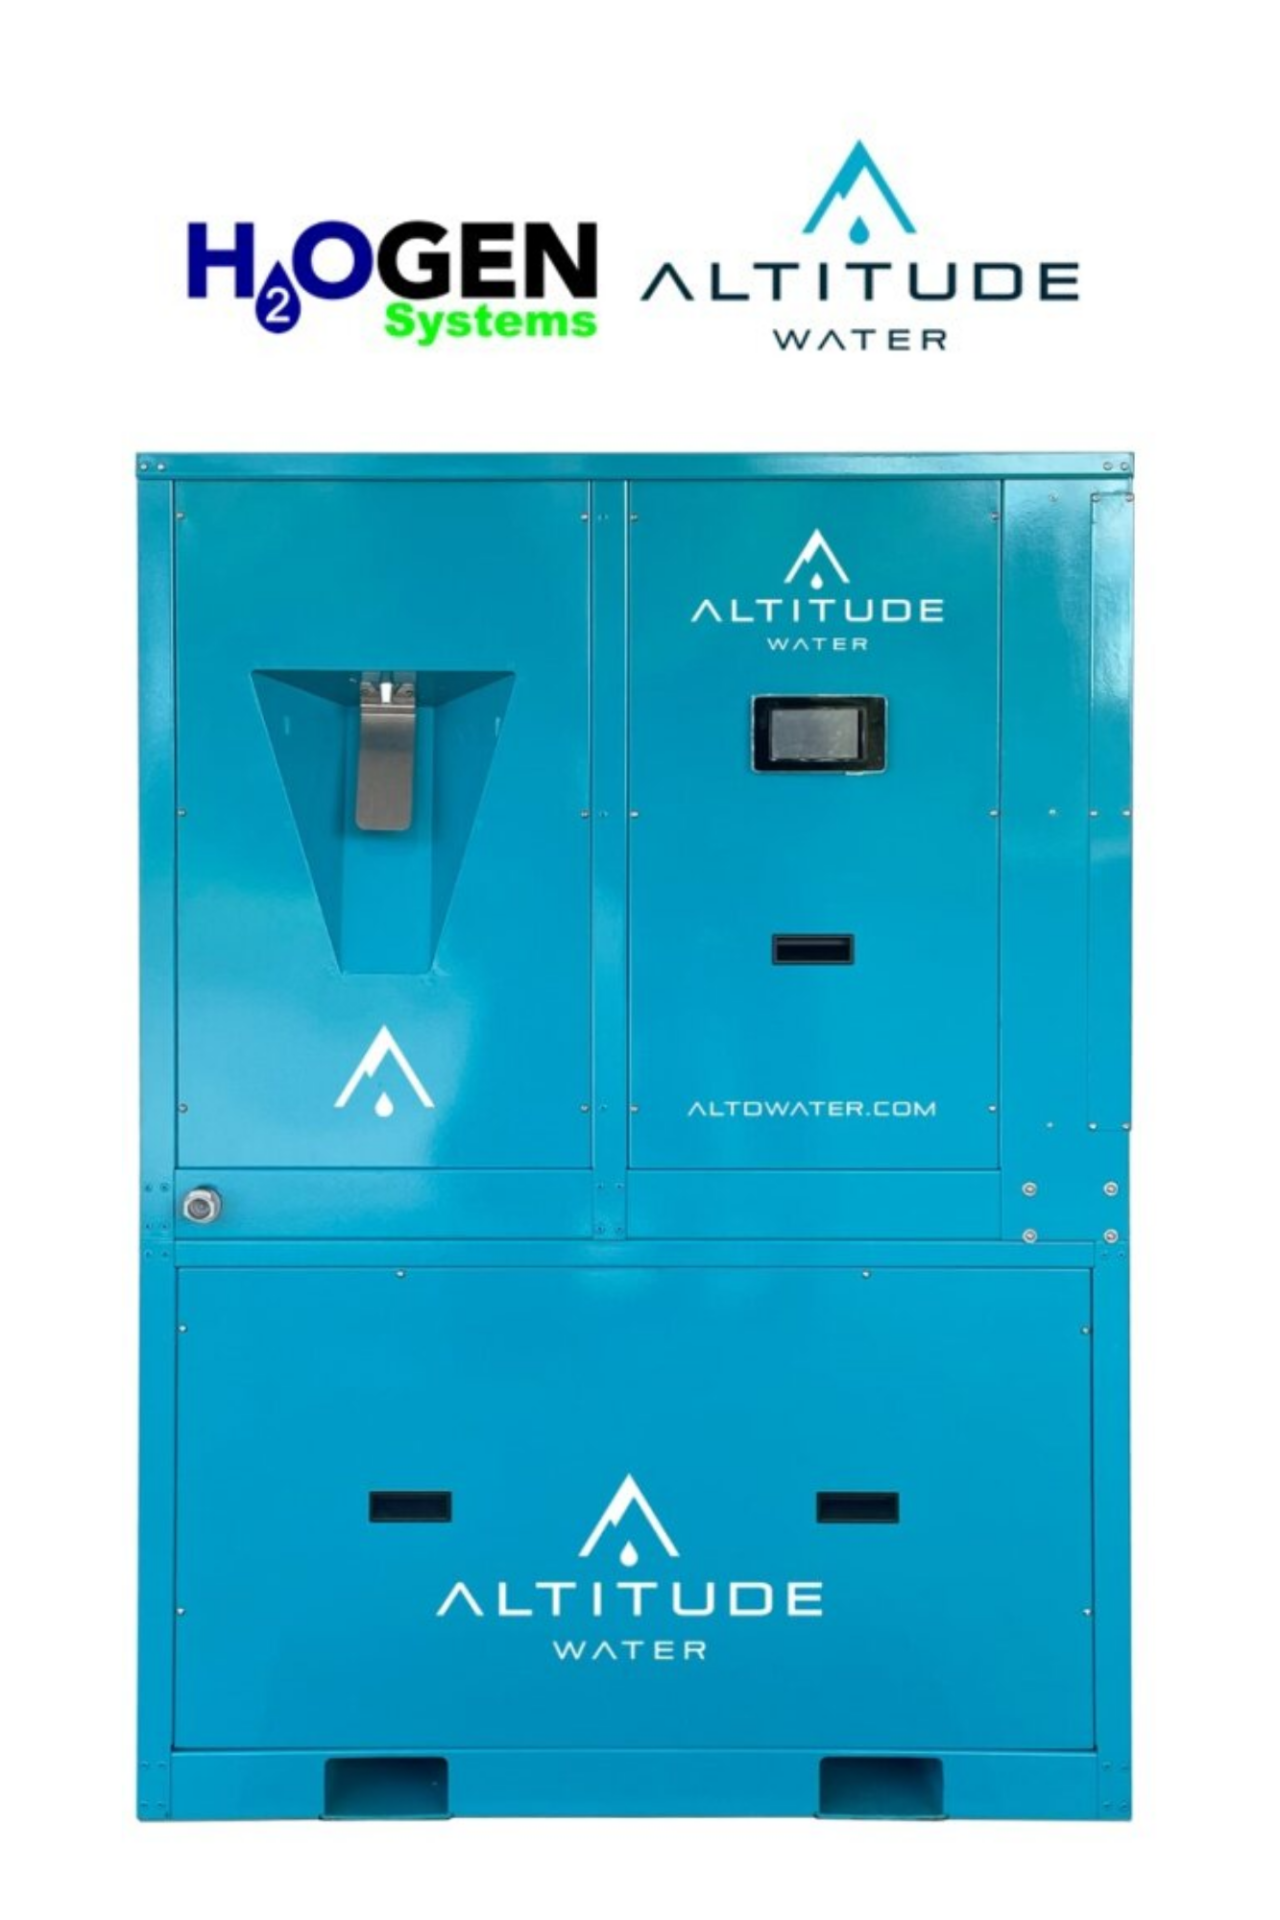 Hogen Systems and Altitude Water Forge Strategic Alliance to Expand Reach of Atmospheric Water Generation Technology